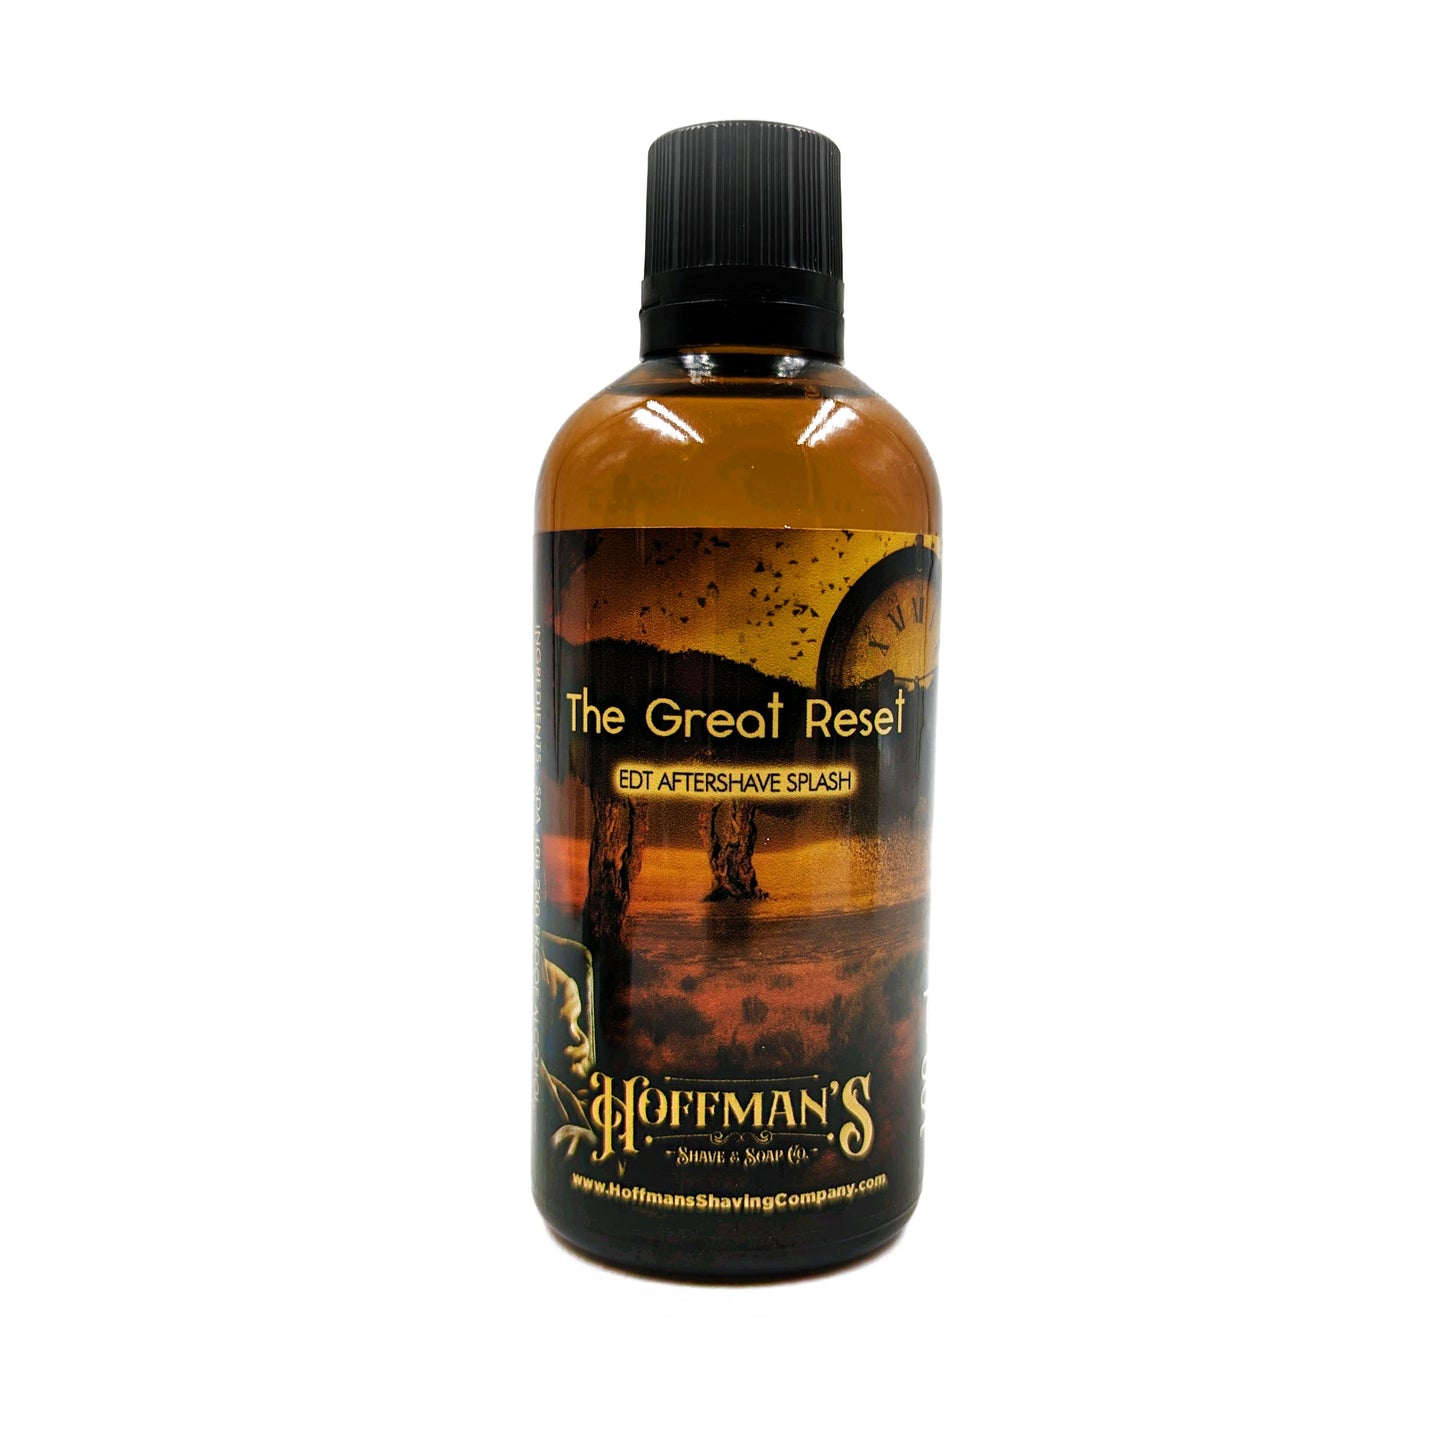 "The Great Reset" EDT Aftershave Splash 100ml